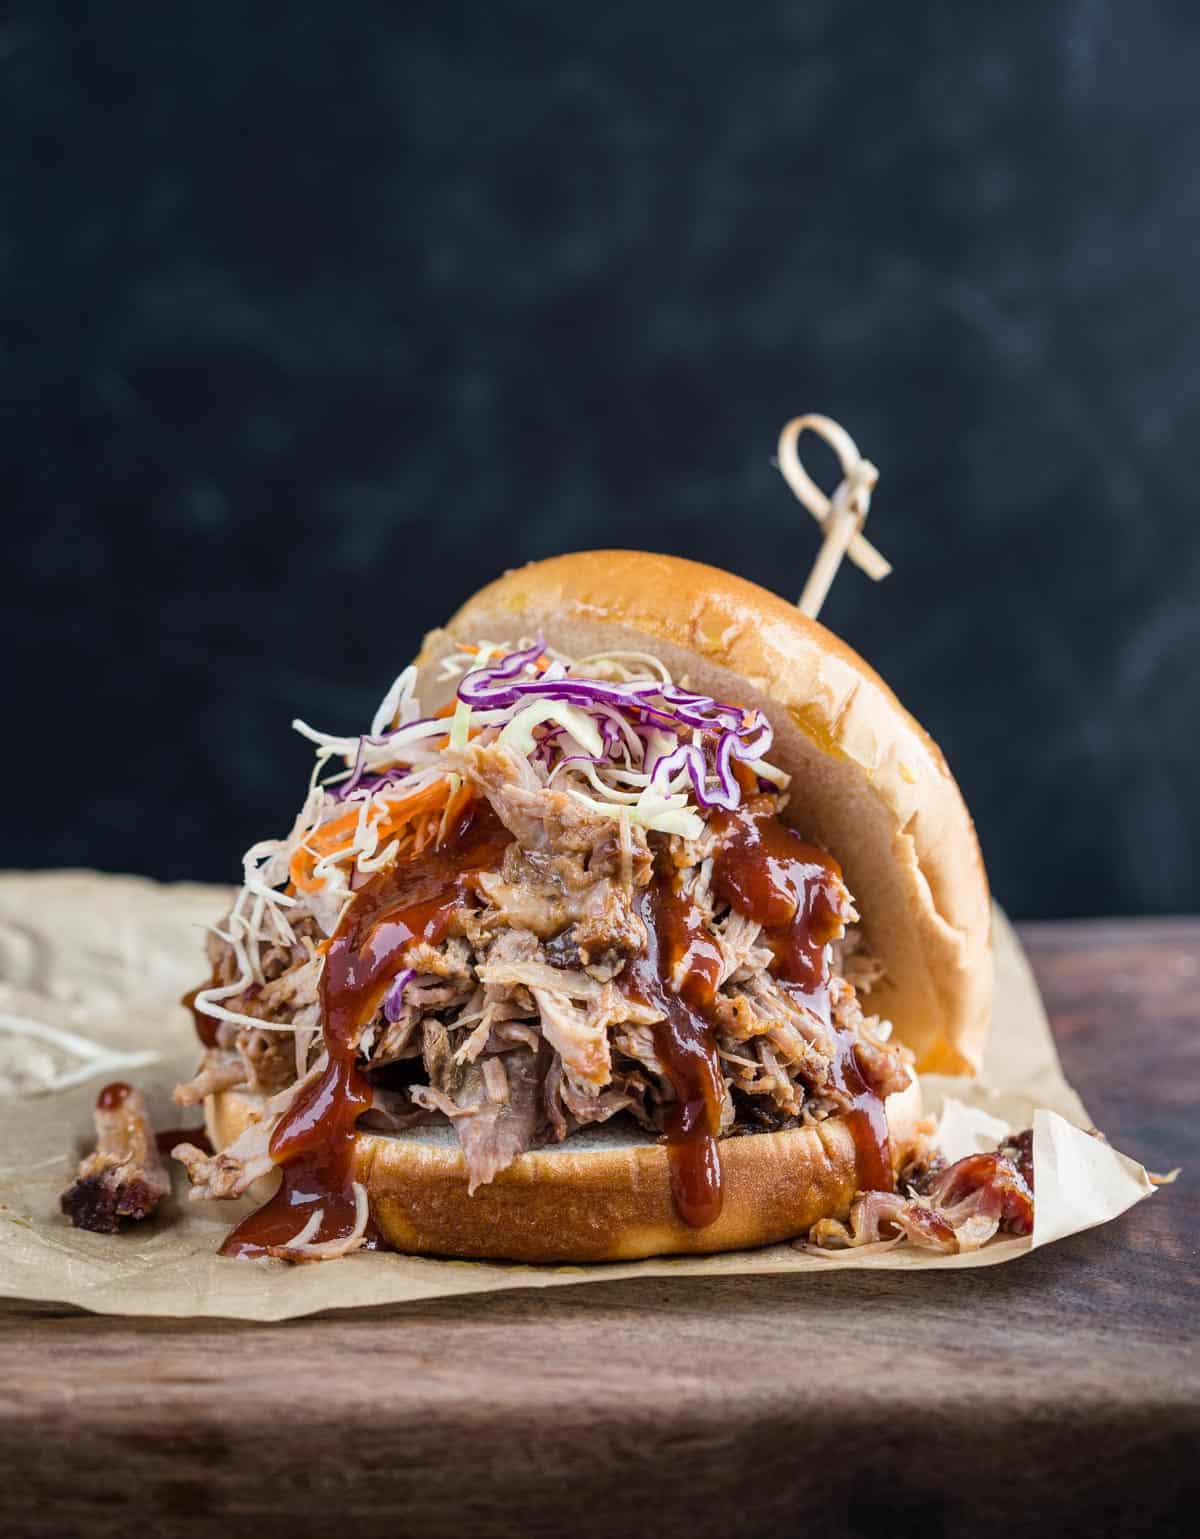 https://www.vindulge.com/wp-content/uploads/2021/09/Pulled-Pork-Sandwich-with-easy-smoked-pulled-pork.jpg